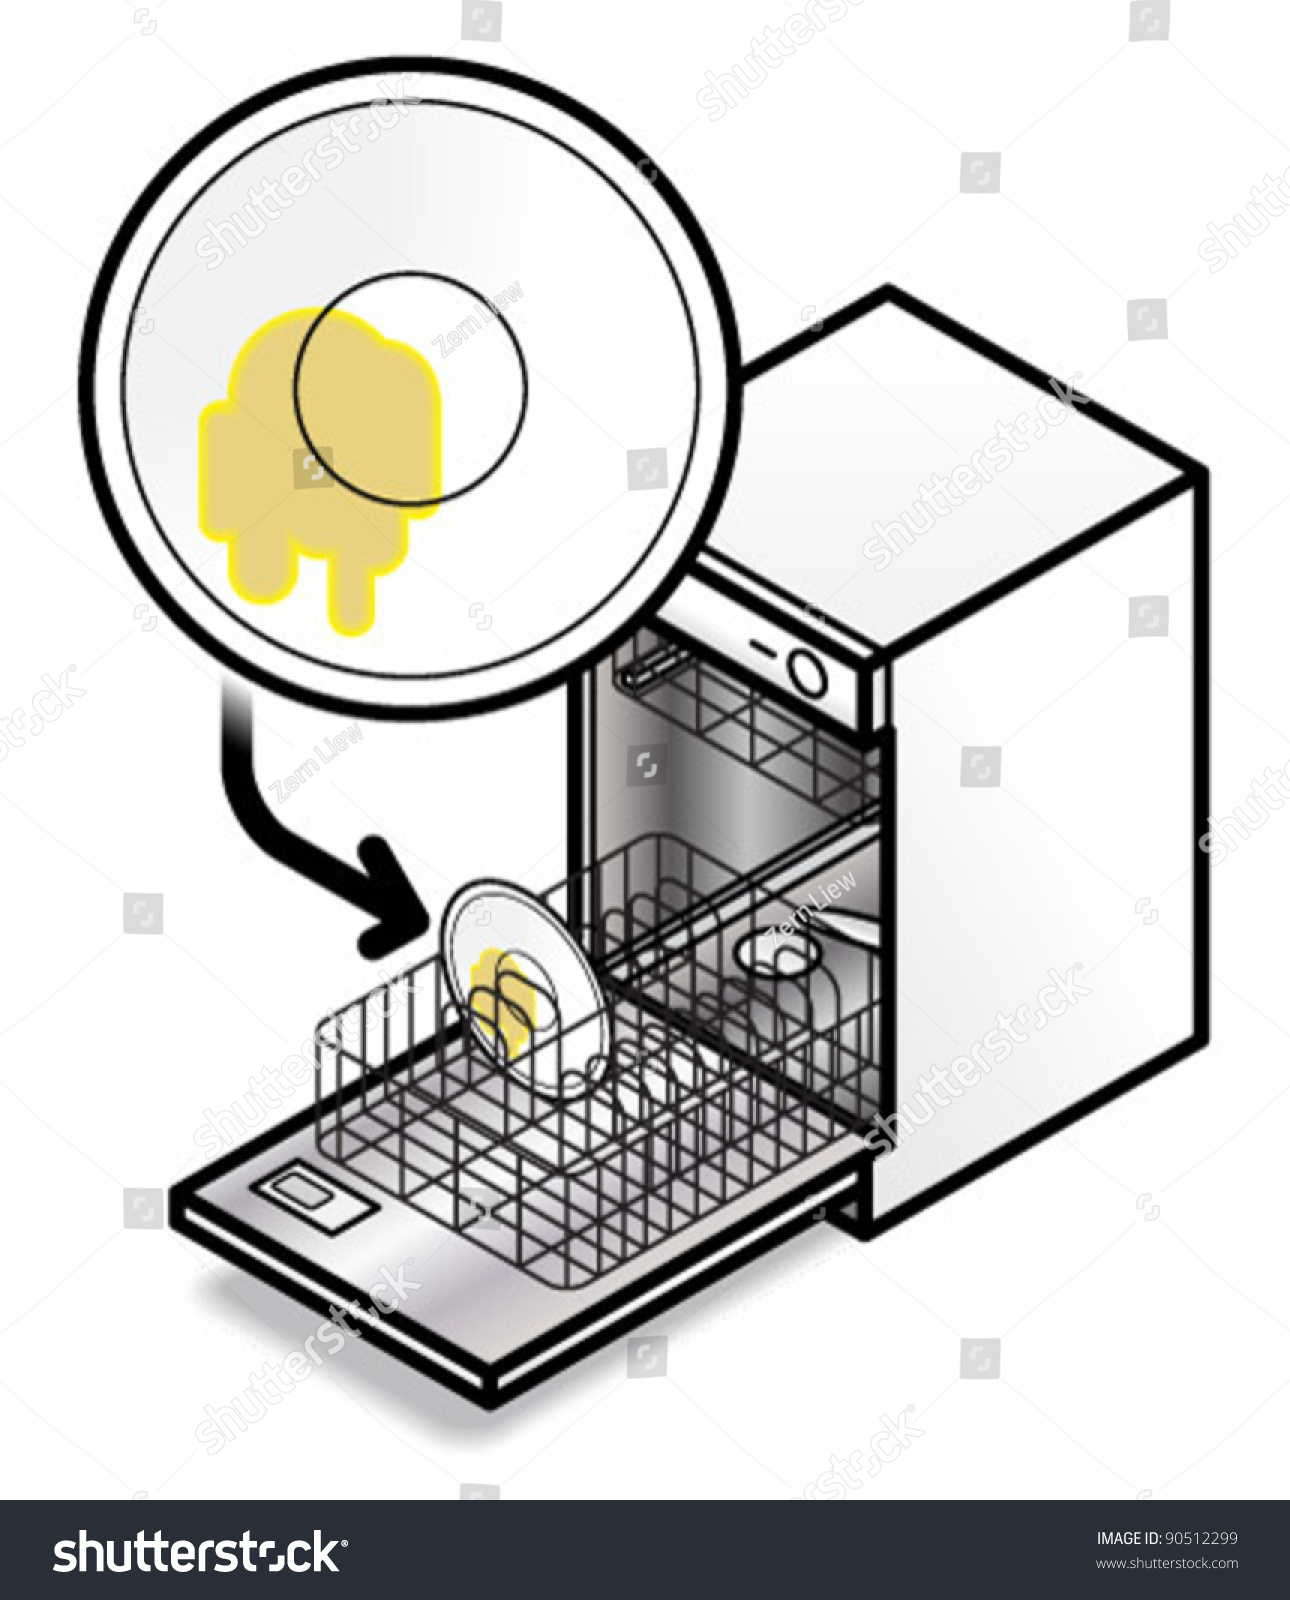 please-put-dirty-dishes-dishwasher-perfect-stock-vector-90512299-shutterstock